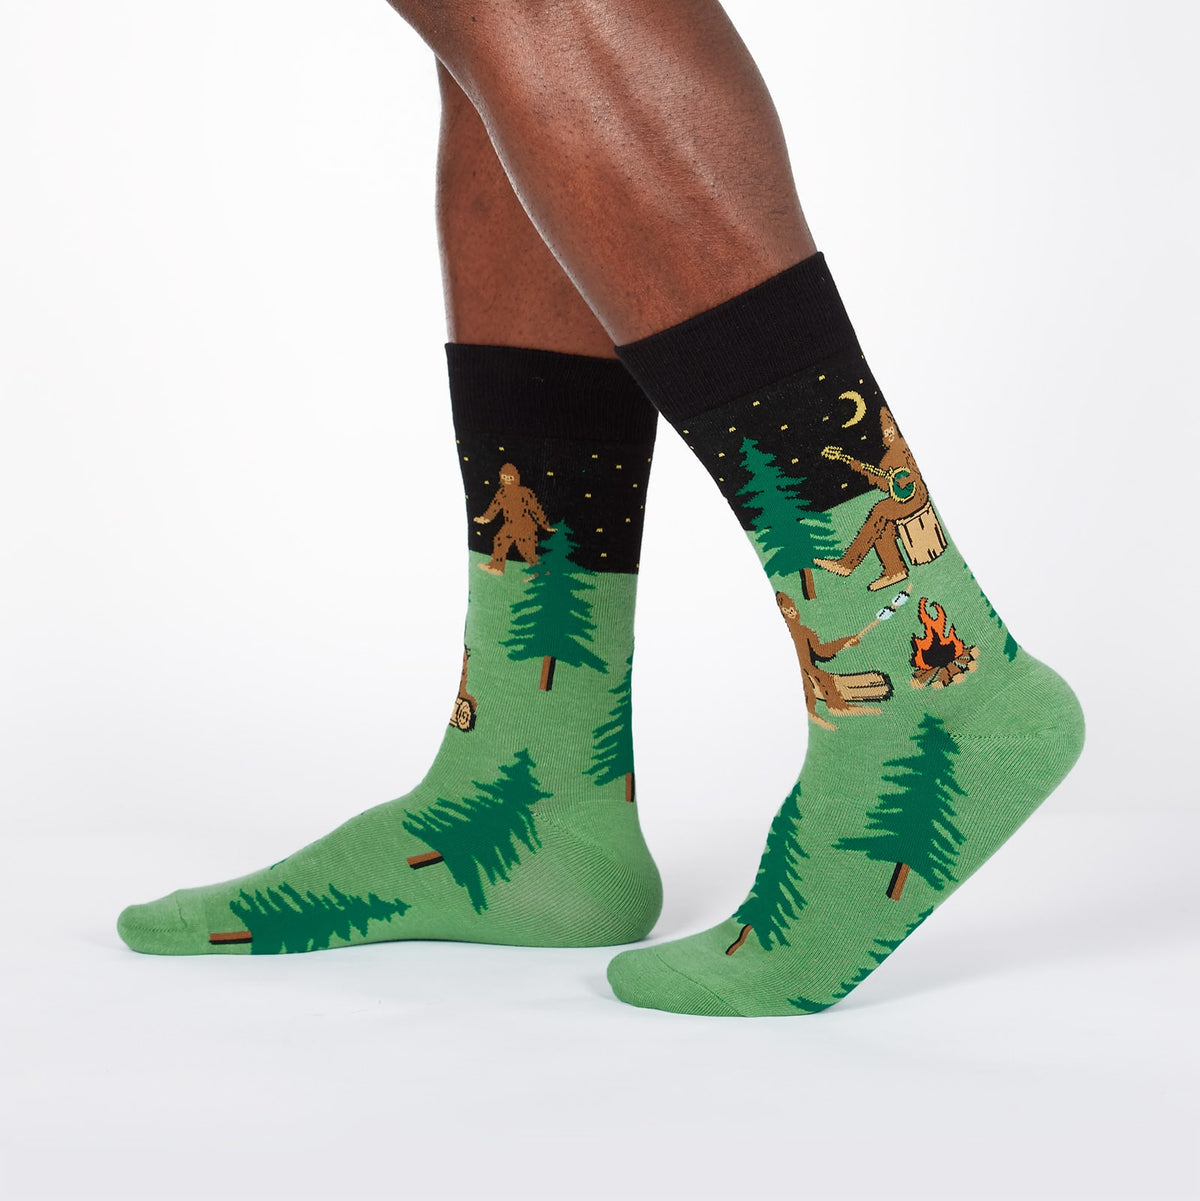 Sock It To Me Sasquatch Camp Out men&#39;s socks on model showing Sasquatch playing a big banjo and little Sasquatch roasting marshmallows by a campfire